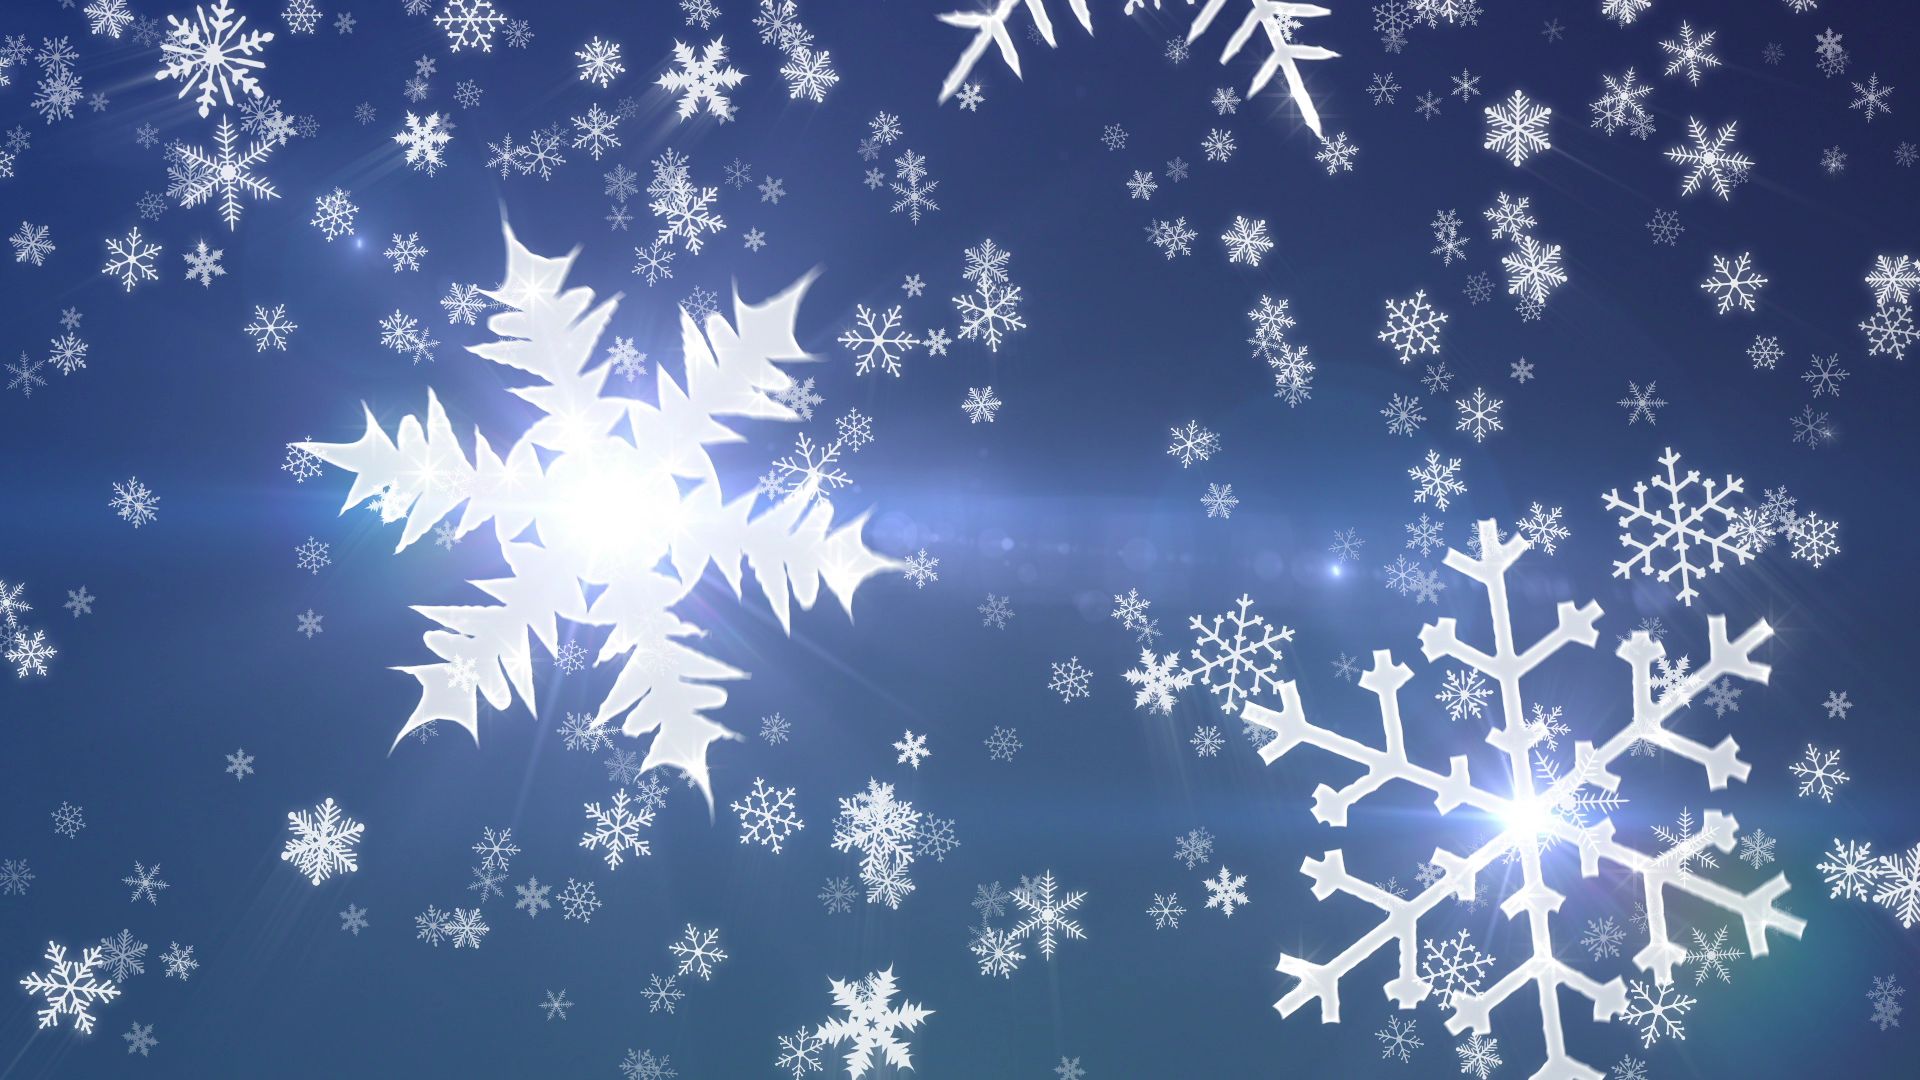 Snowy 1 | downloops – Creative Motion Backgrounds